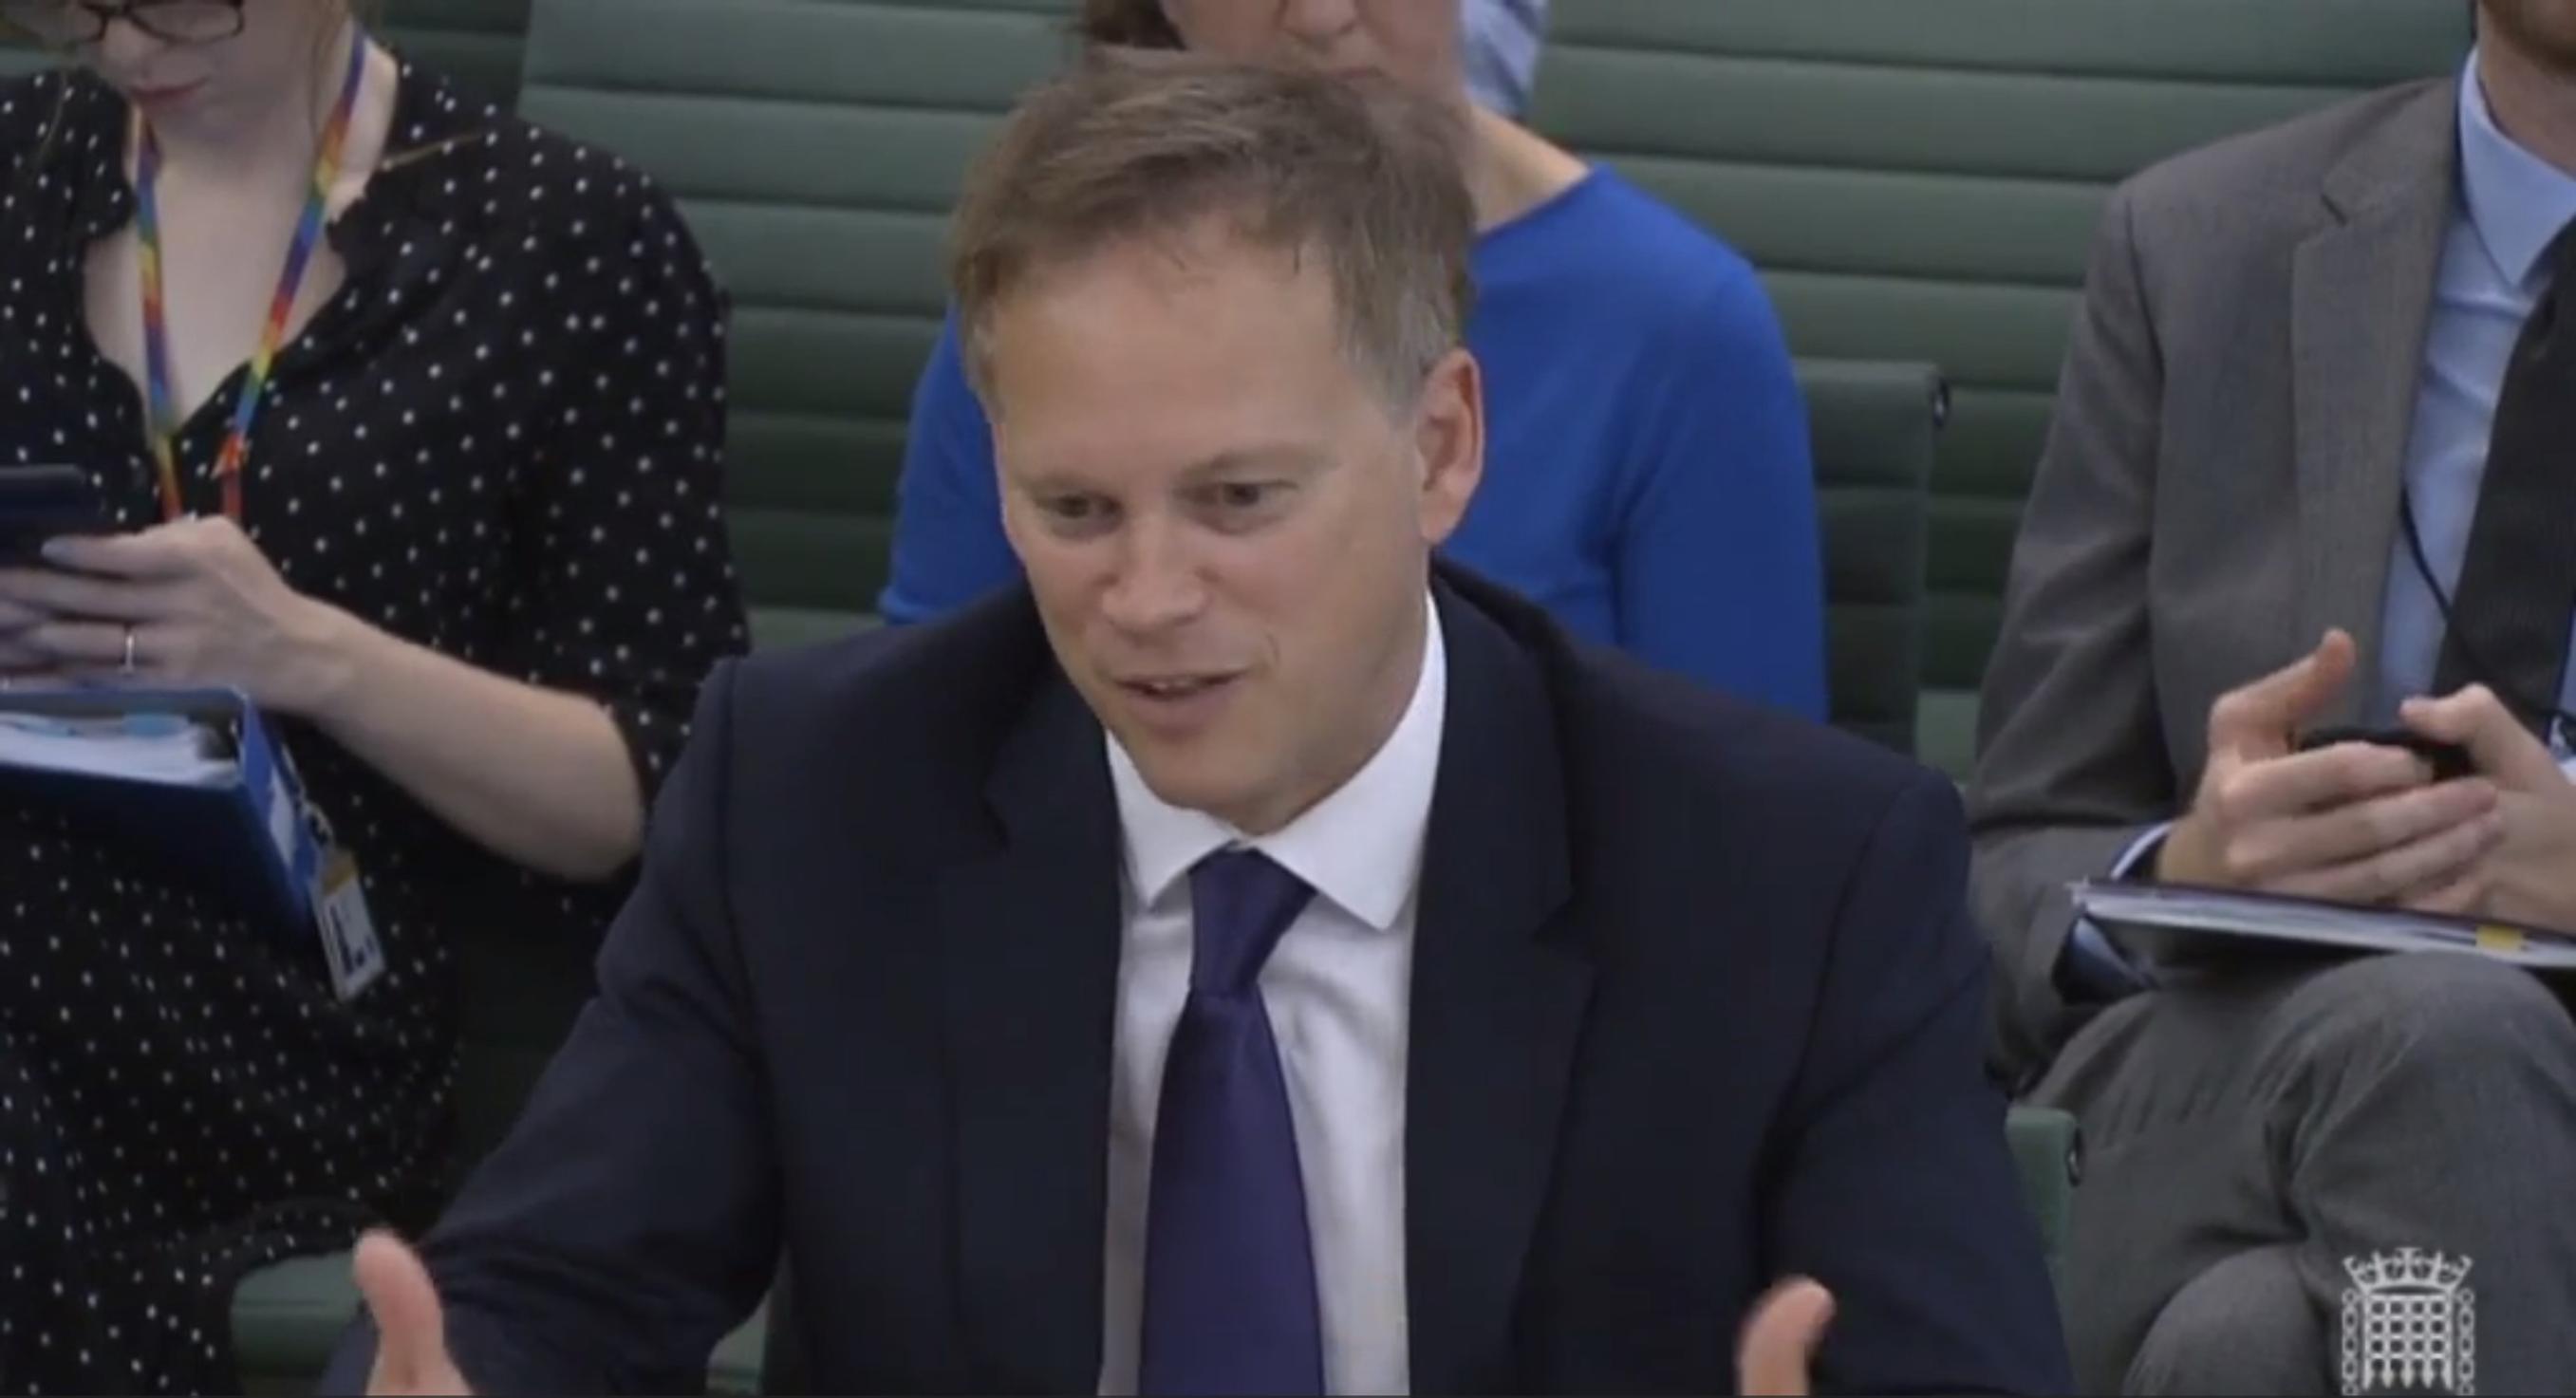 Grant Shapps speaking to the Transport Committee and giving cycling two thumbs up (I think)